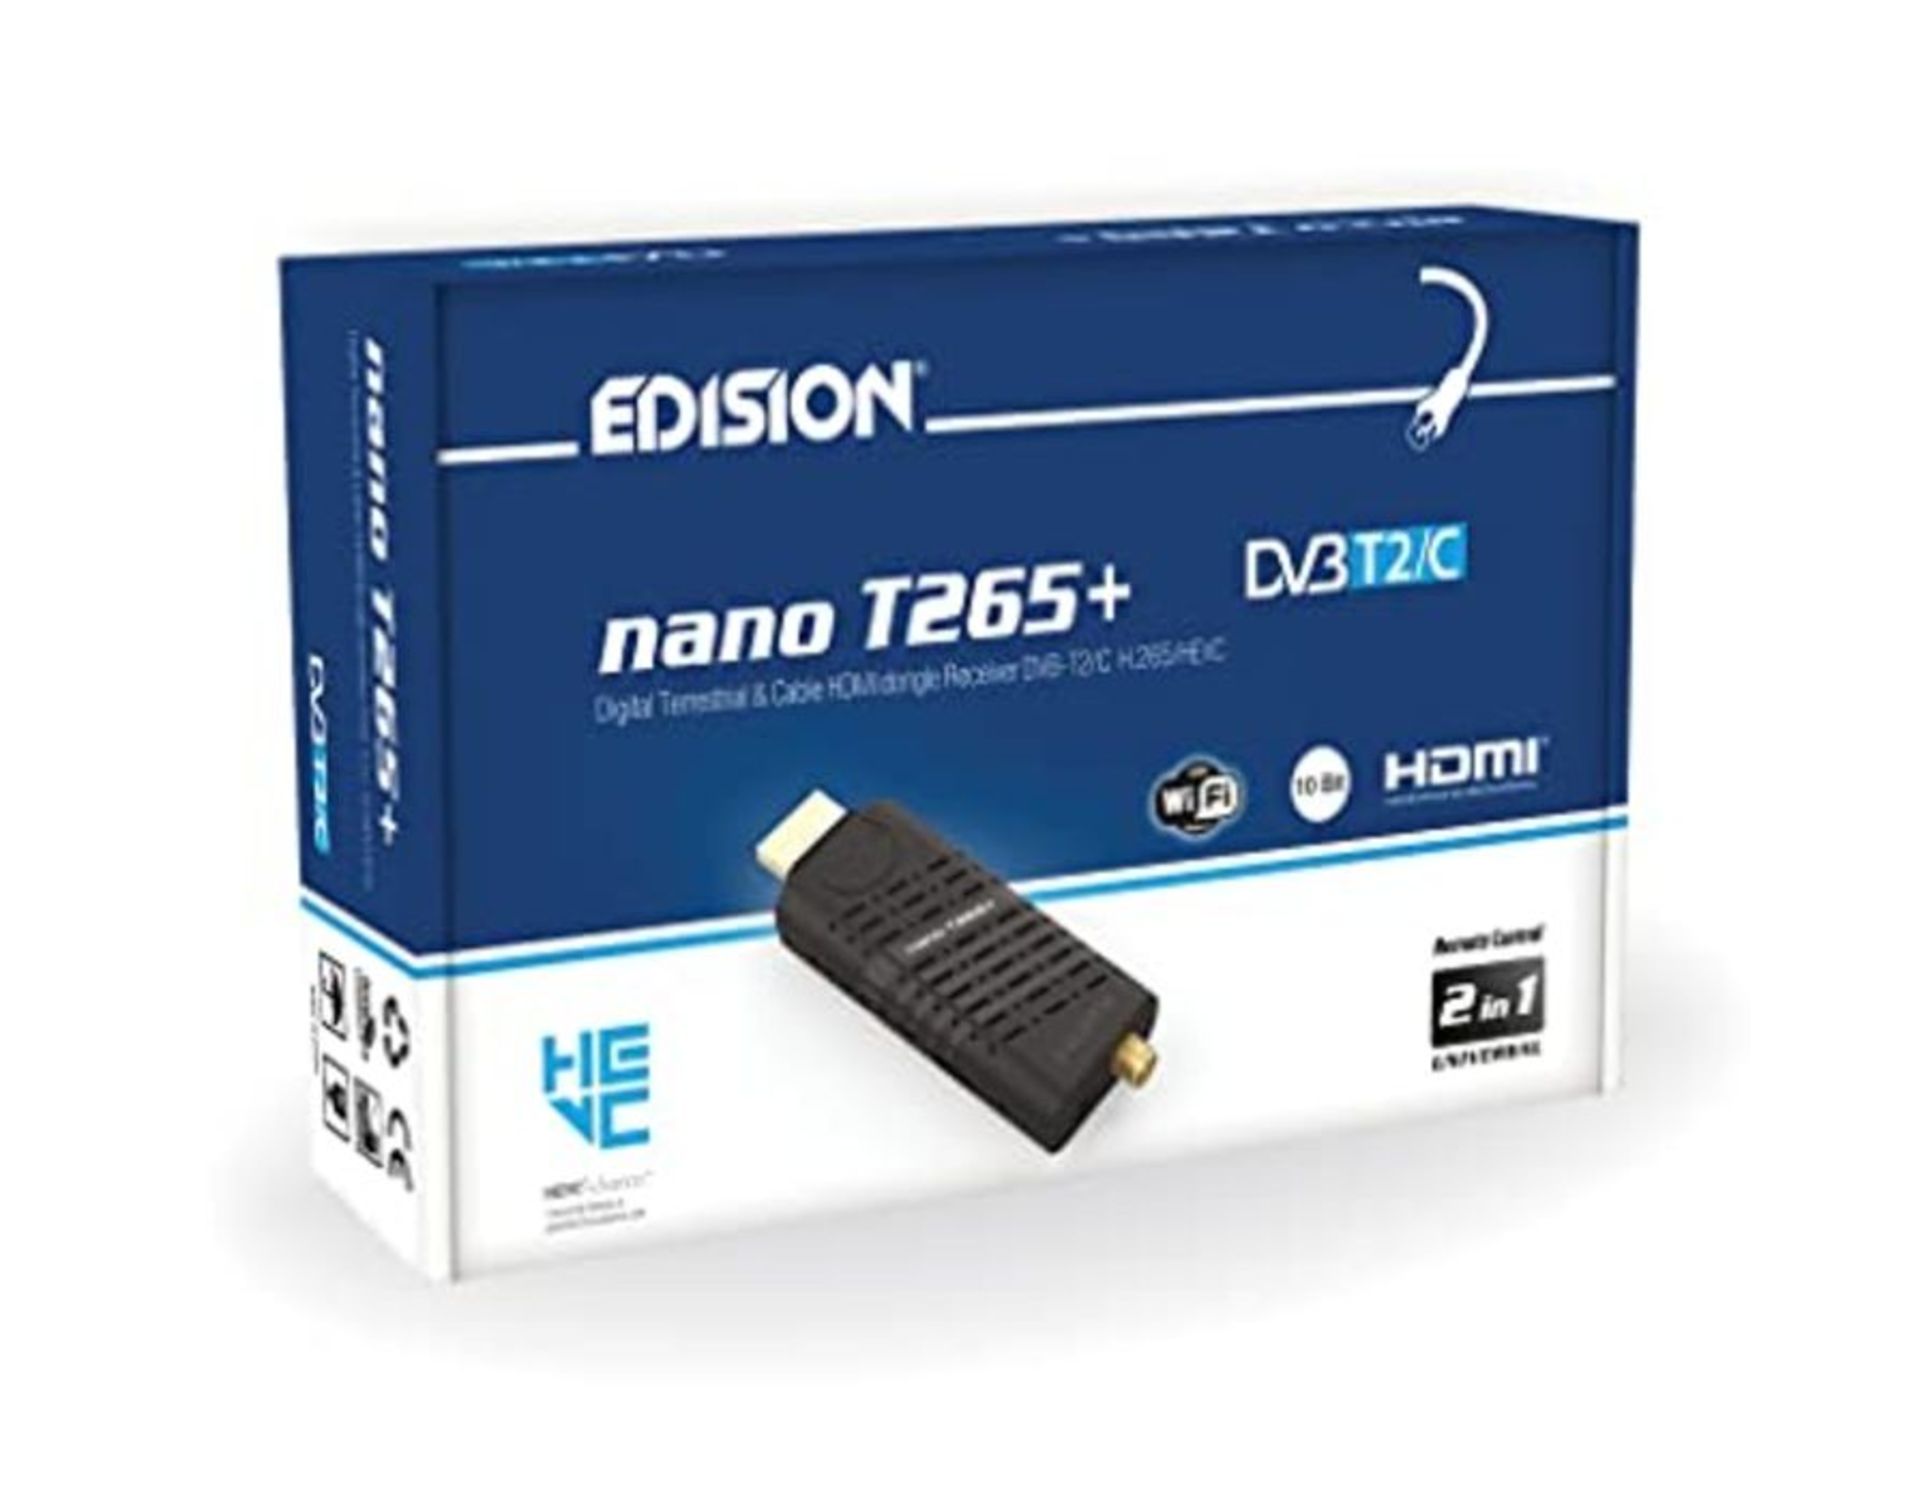 Edision NANO T265 Terrestrial and Cable HDMI dongle Receiver, DVB-T2/C, H265 HEVC, FT